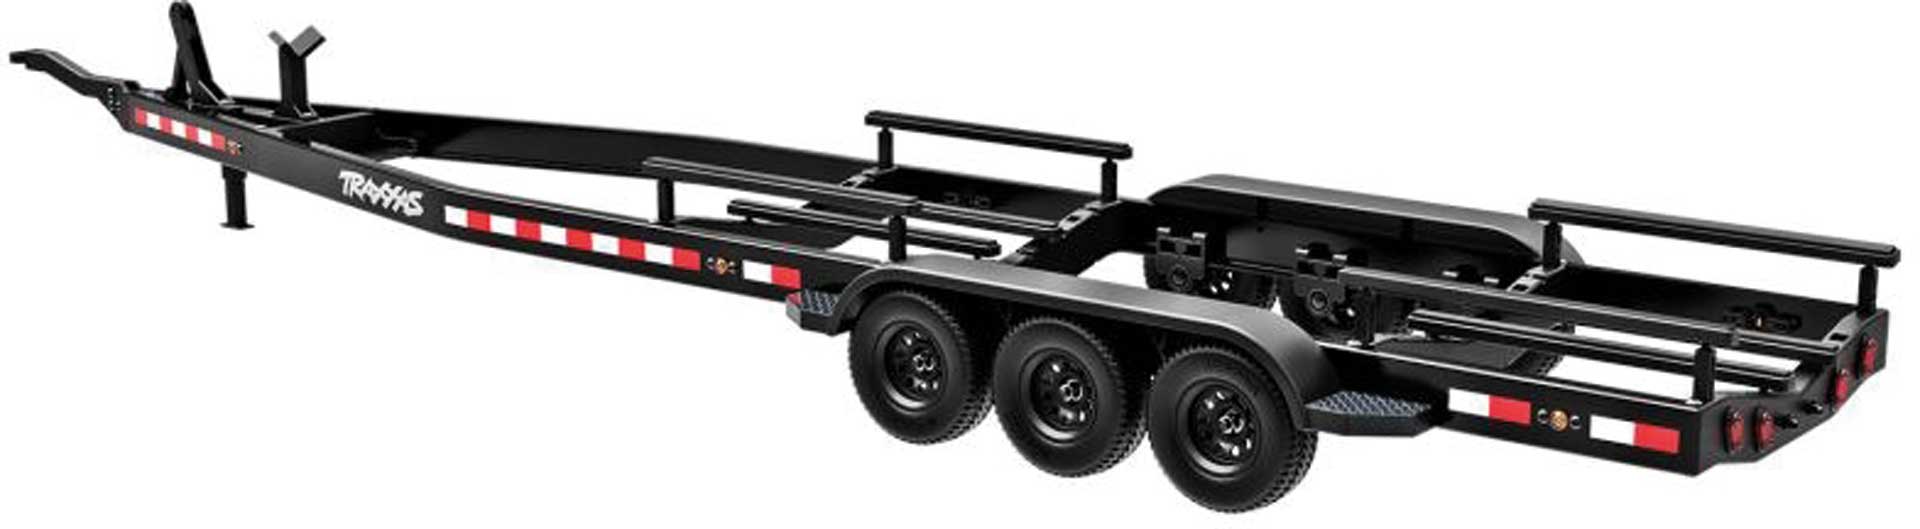 TRAXXAS BOAT TRAILER FOR SPARTAN, SPARTAN SR & M41 COMPATIBLE WITH MANY 1/10 TRX VEHICLES